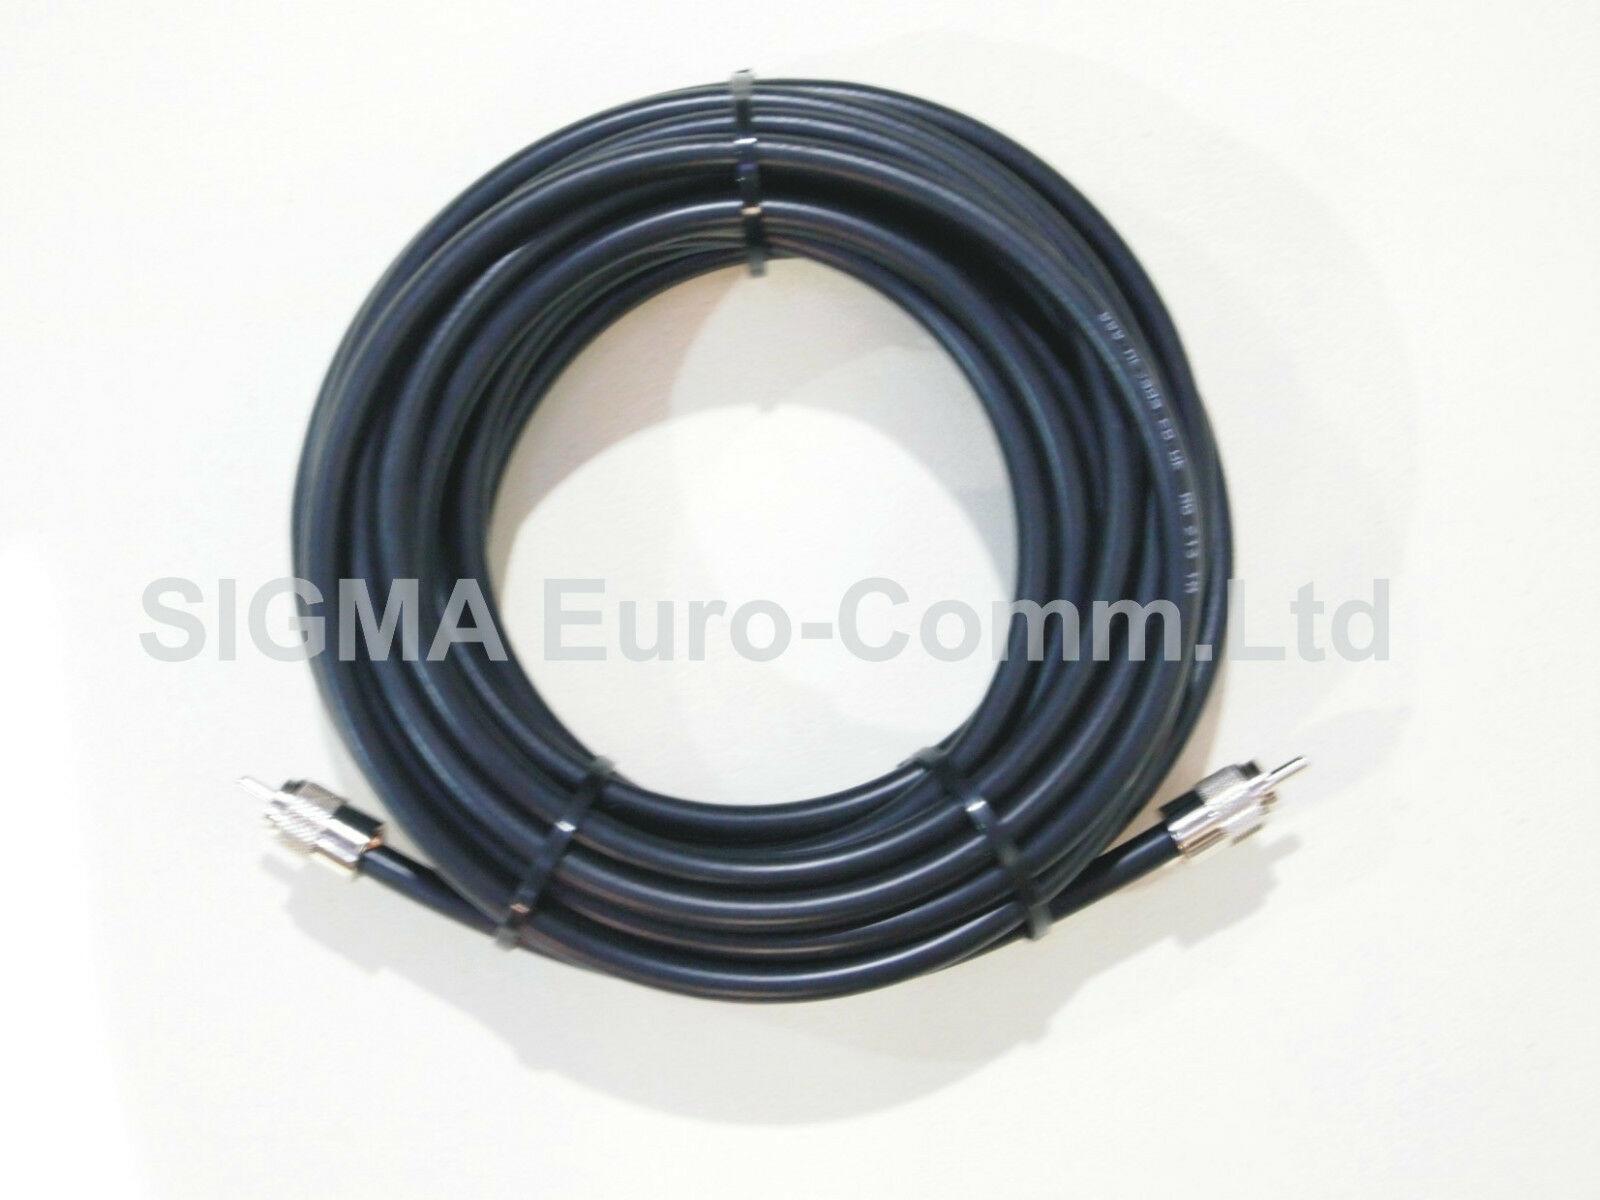 Sigma RG213 Low Loss 50 Ohm Coaxial Cable 10m Fitted With 2 x PL259 Male Connectors